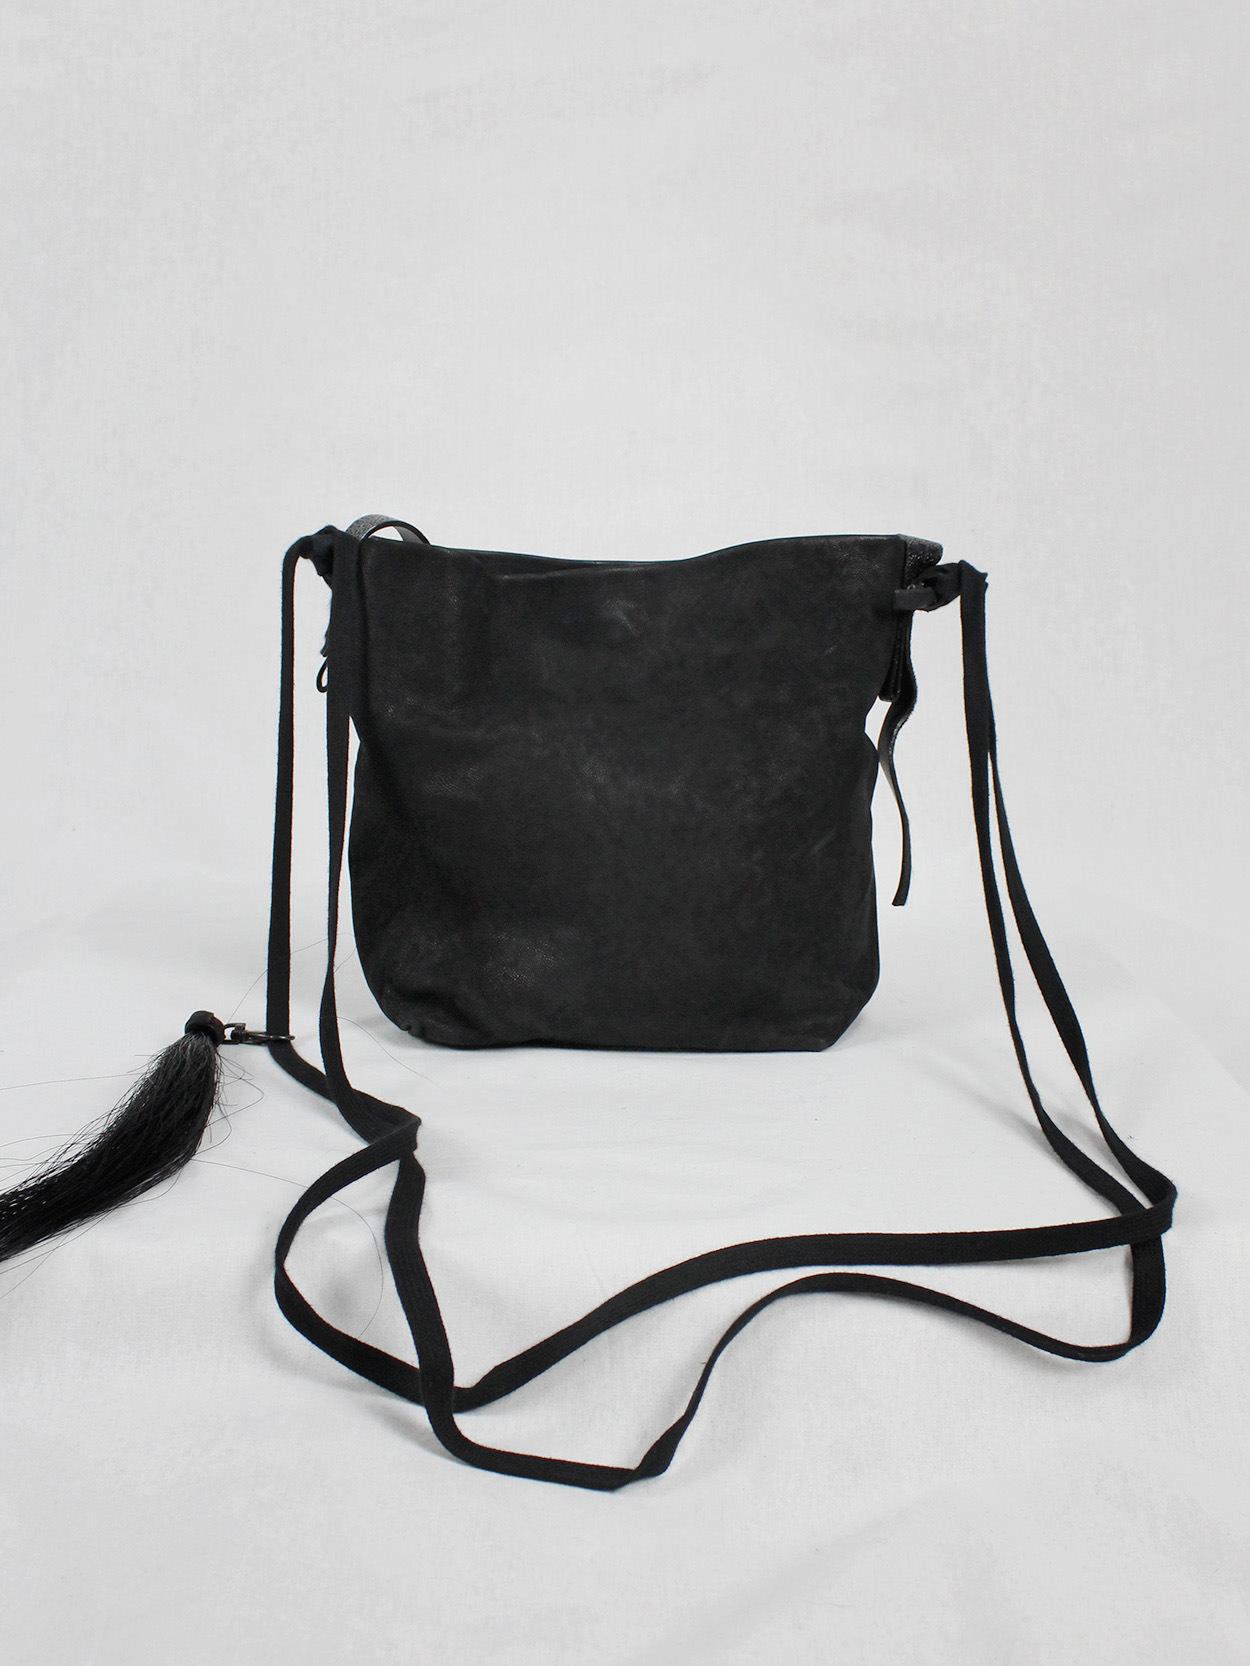 Ann Demeulemeester black leather shoulder bag with extra long horsehair ...